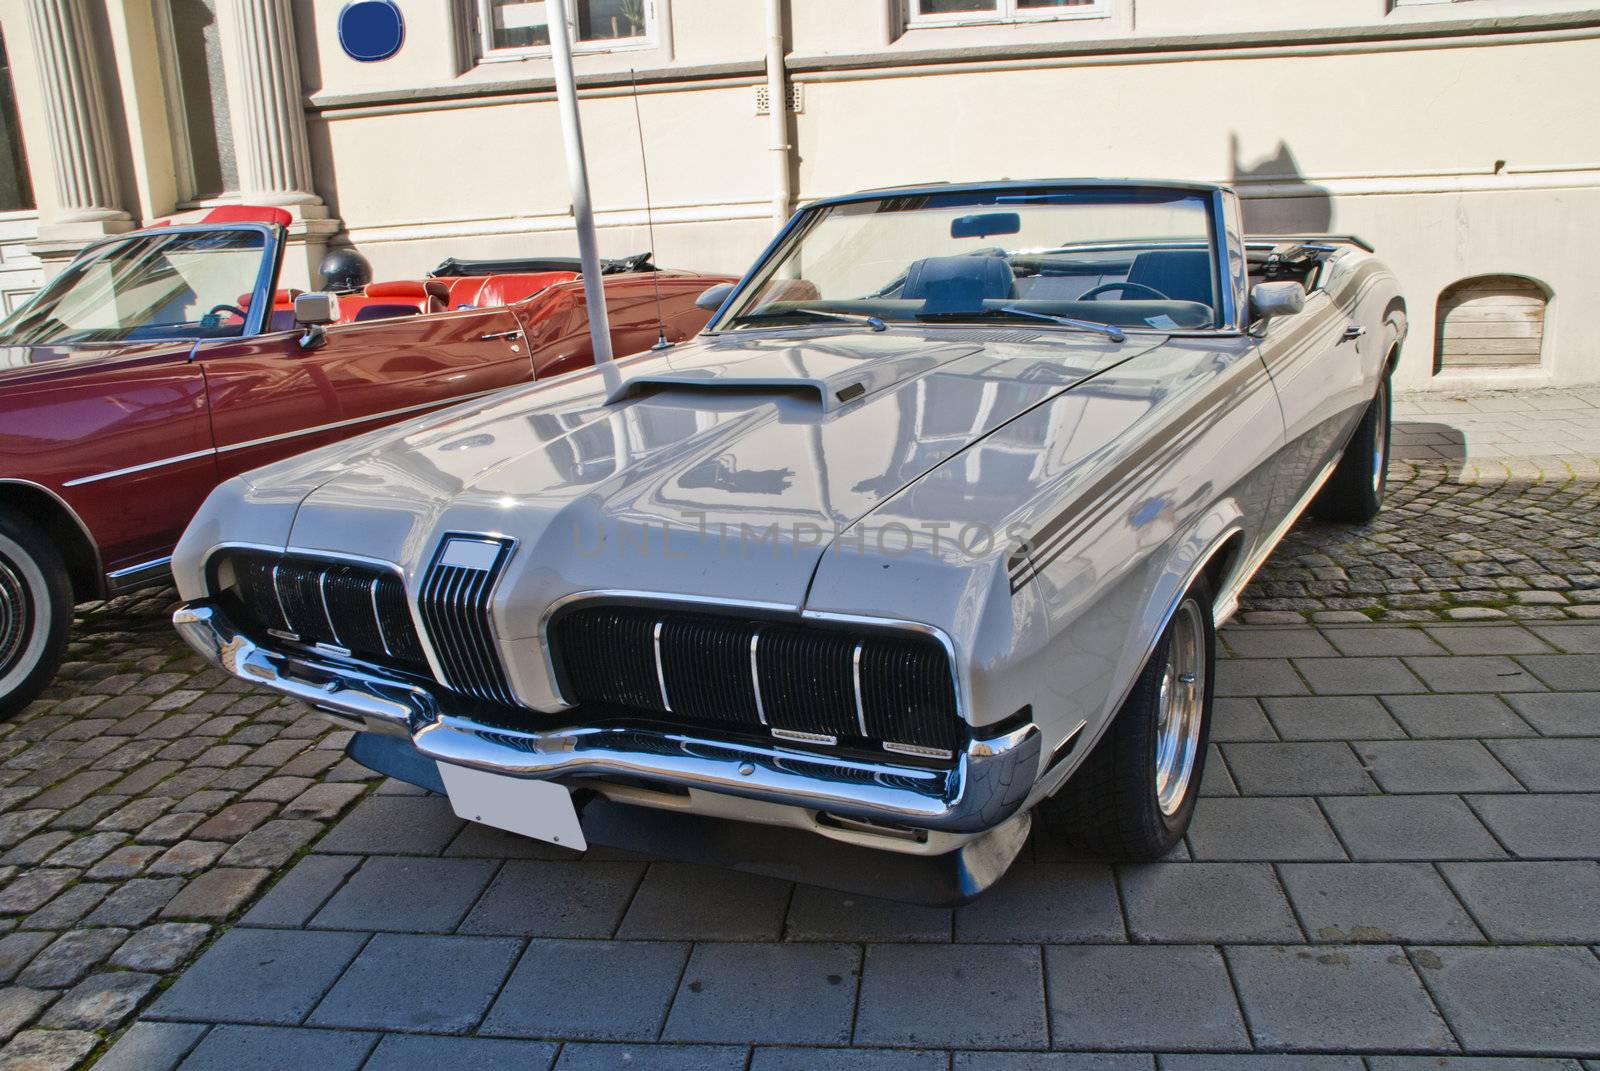 american classic cars, 1970 mercury cougar xr7 convertible, image is shot in august 2012 in halden center, during the summer months every wednesday there is a meeting of classic cars in halden